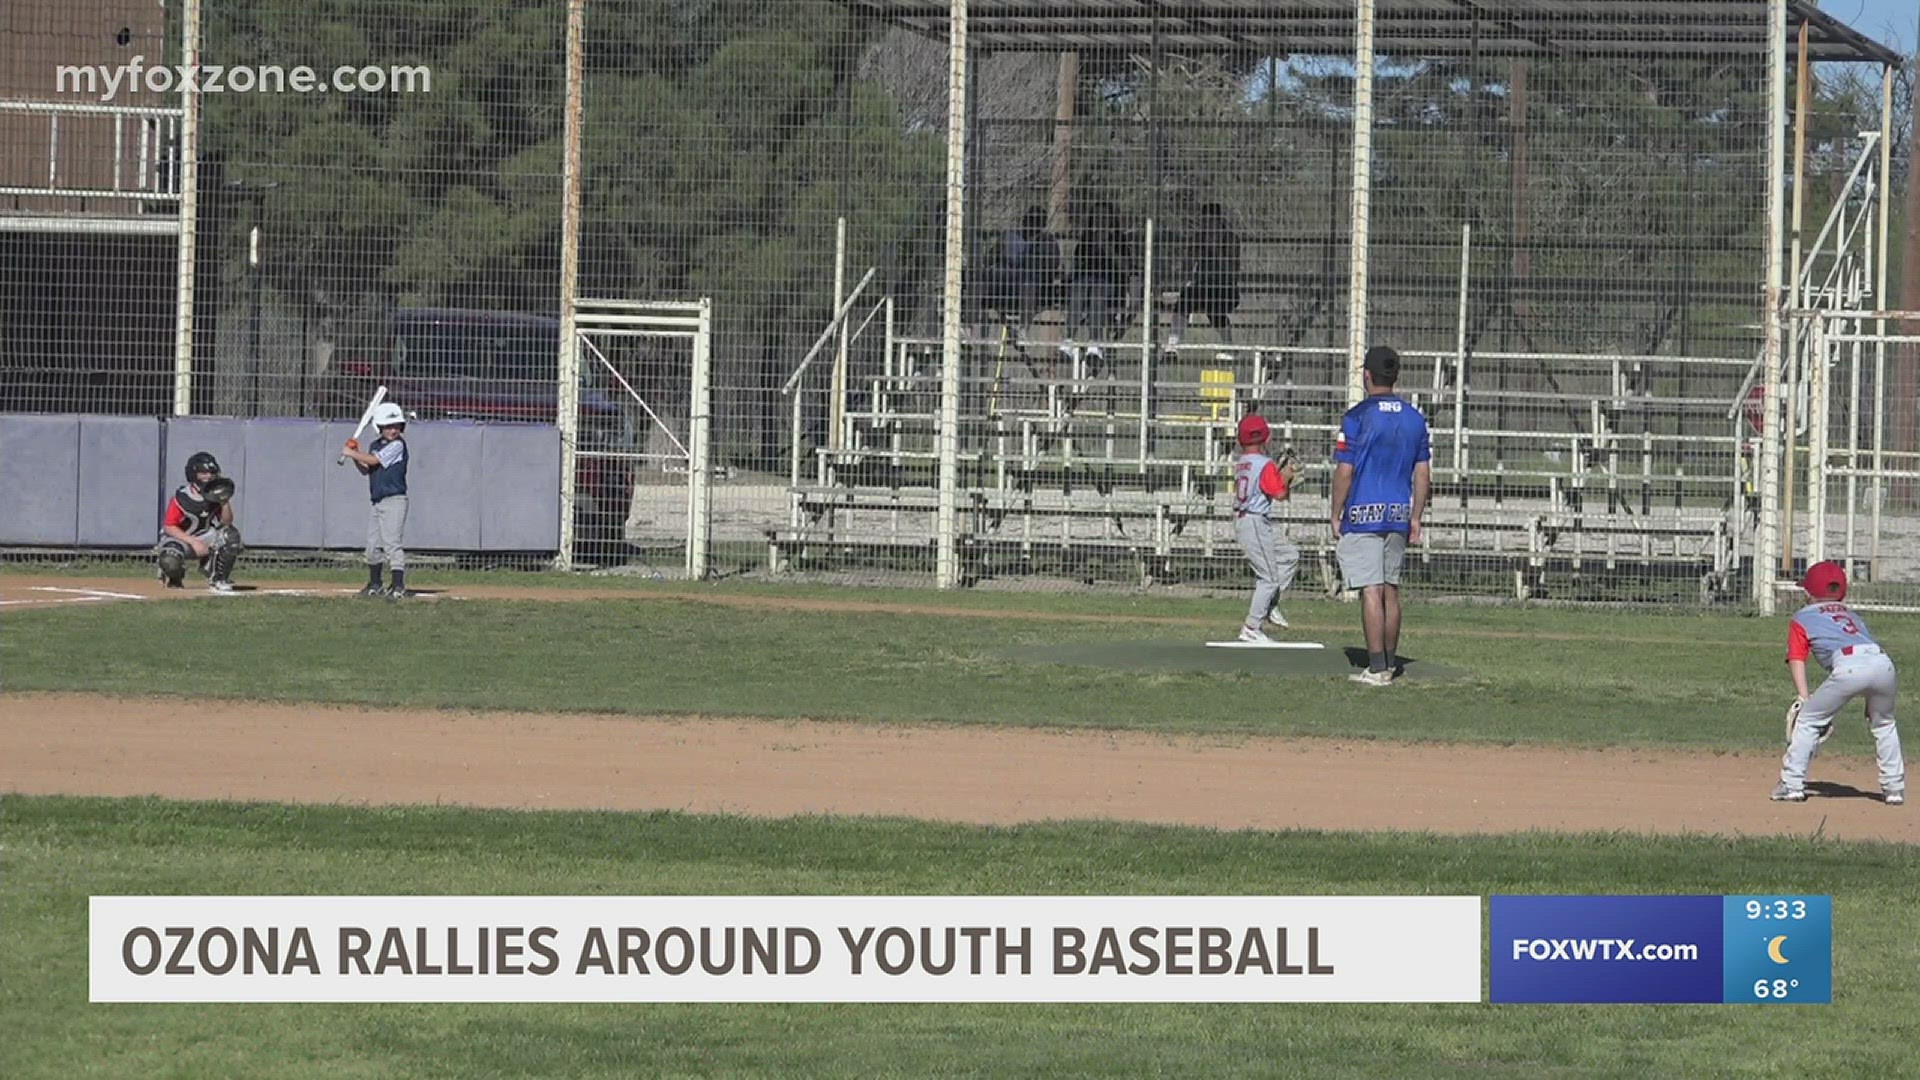 Youth sports are a big thing in the town of less than 3,000 residents, and one sport that shines bright is baseball.